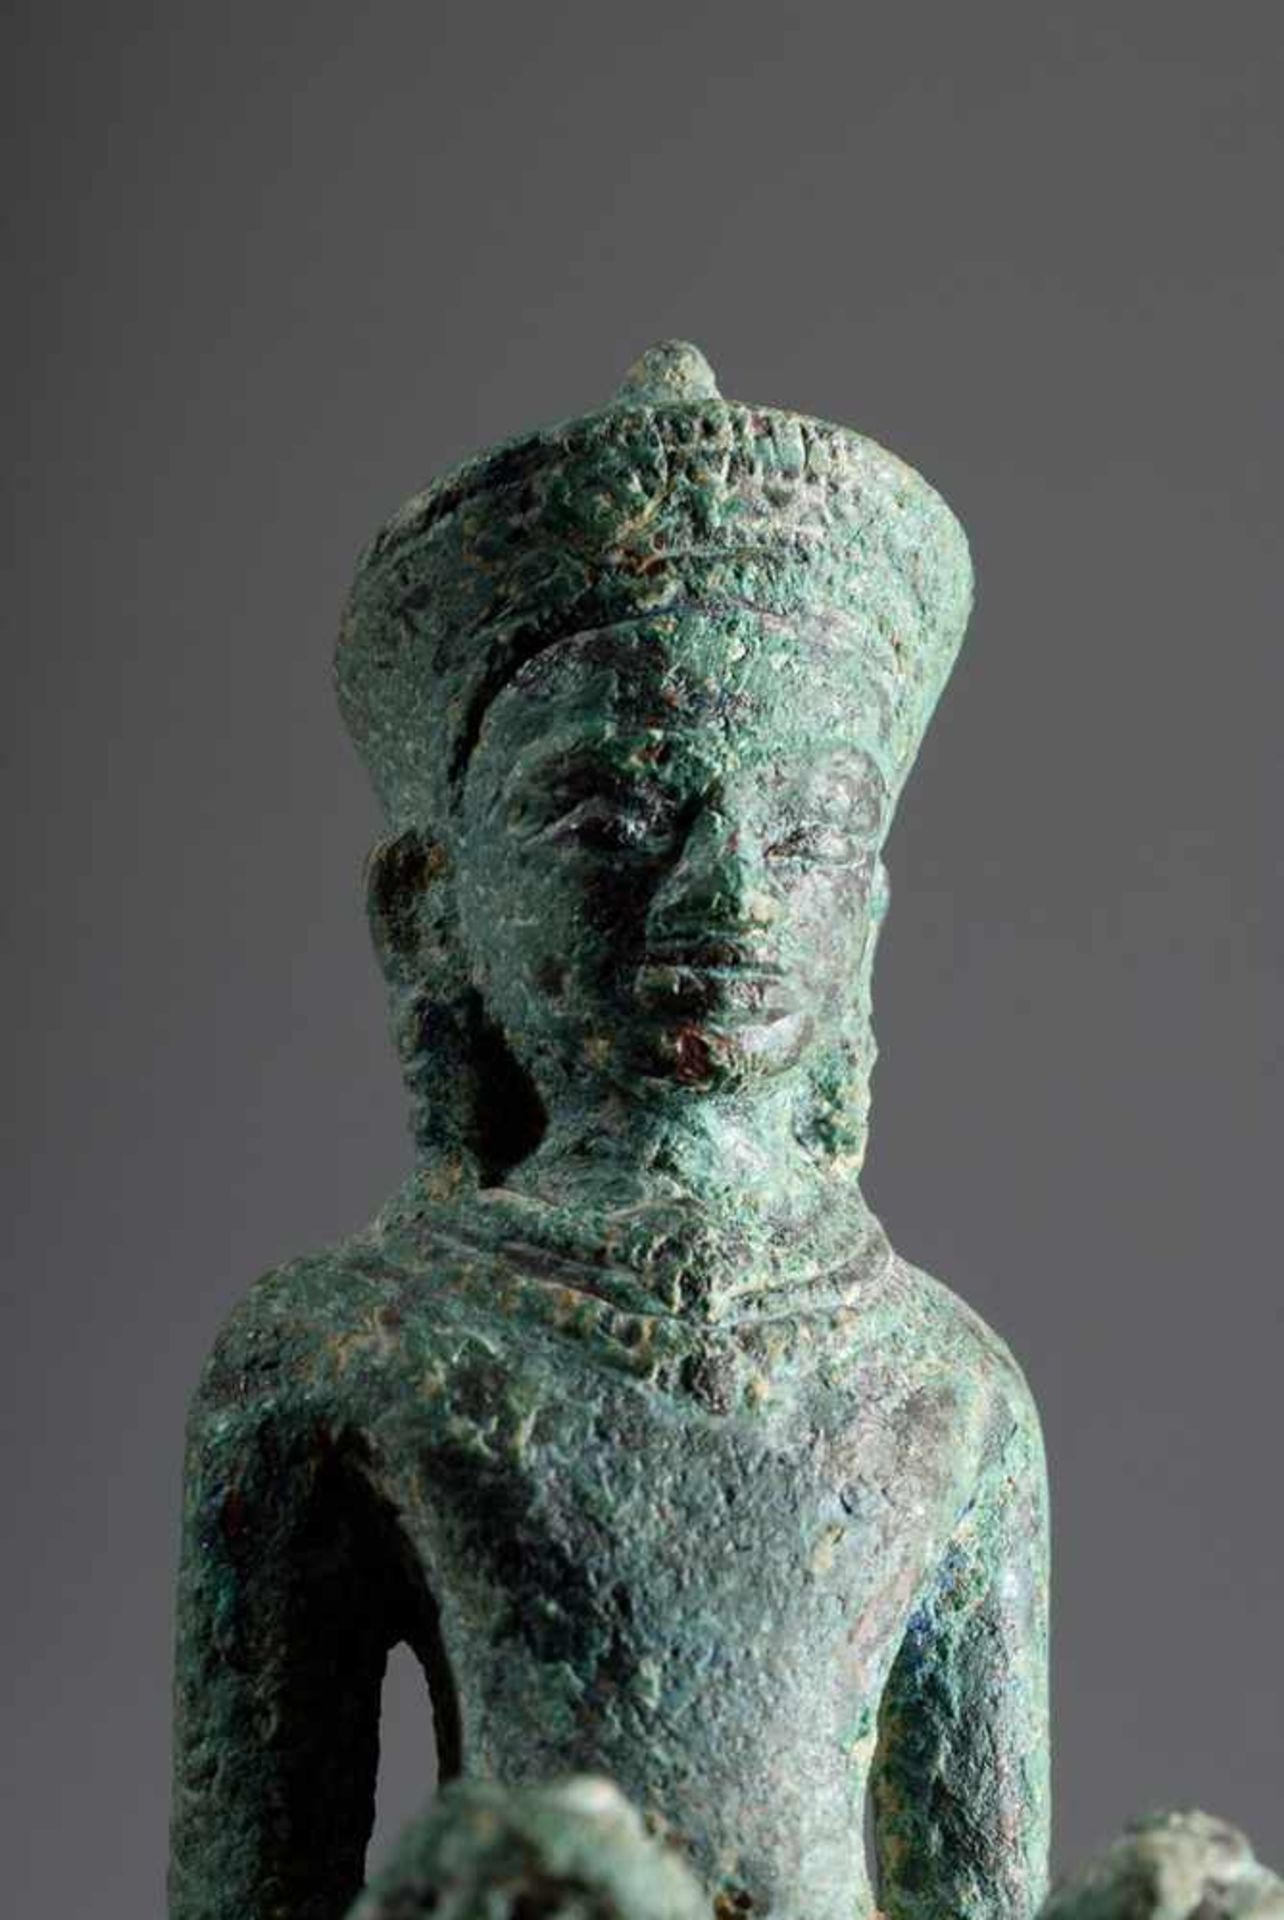 Standing Khmer bronze figure "Godness" holding a chakra in her right hand, probably Shiva, Bayon - Image 4 of 4